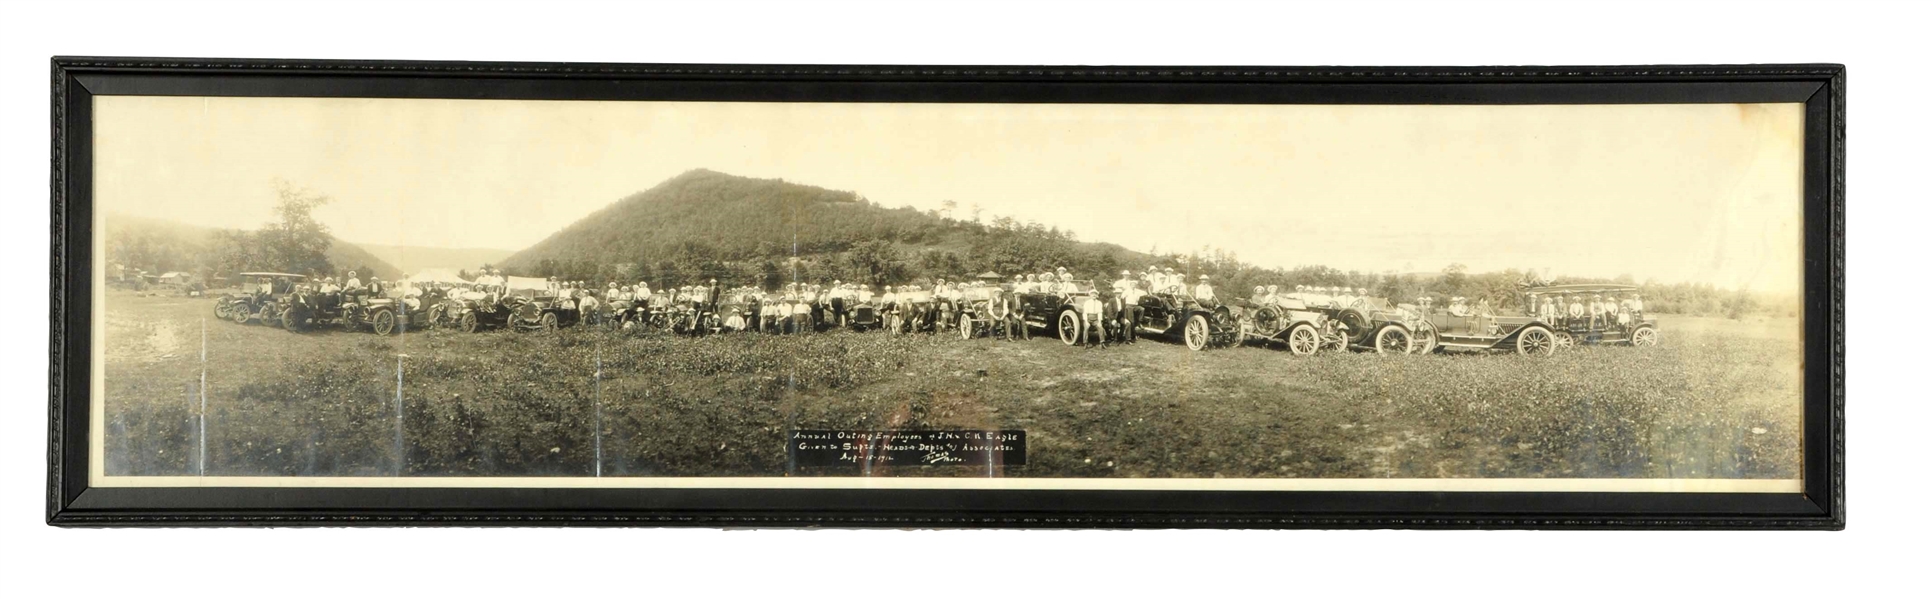 1912 PAMORAMIC PHOTOGRAPHY OF EARLY AUTOS.